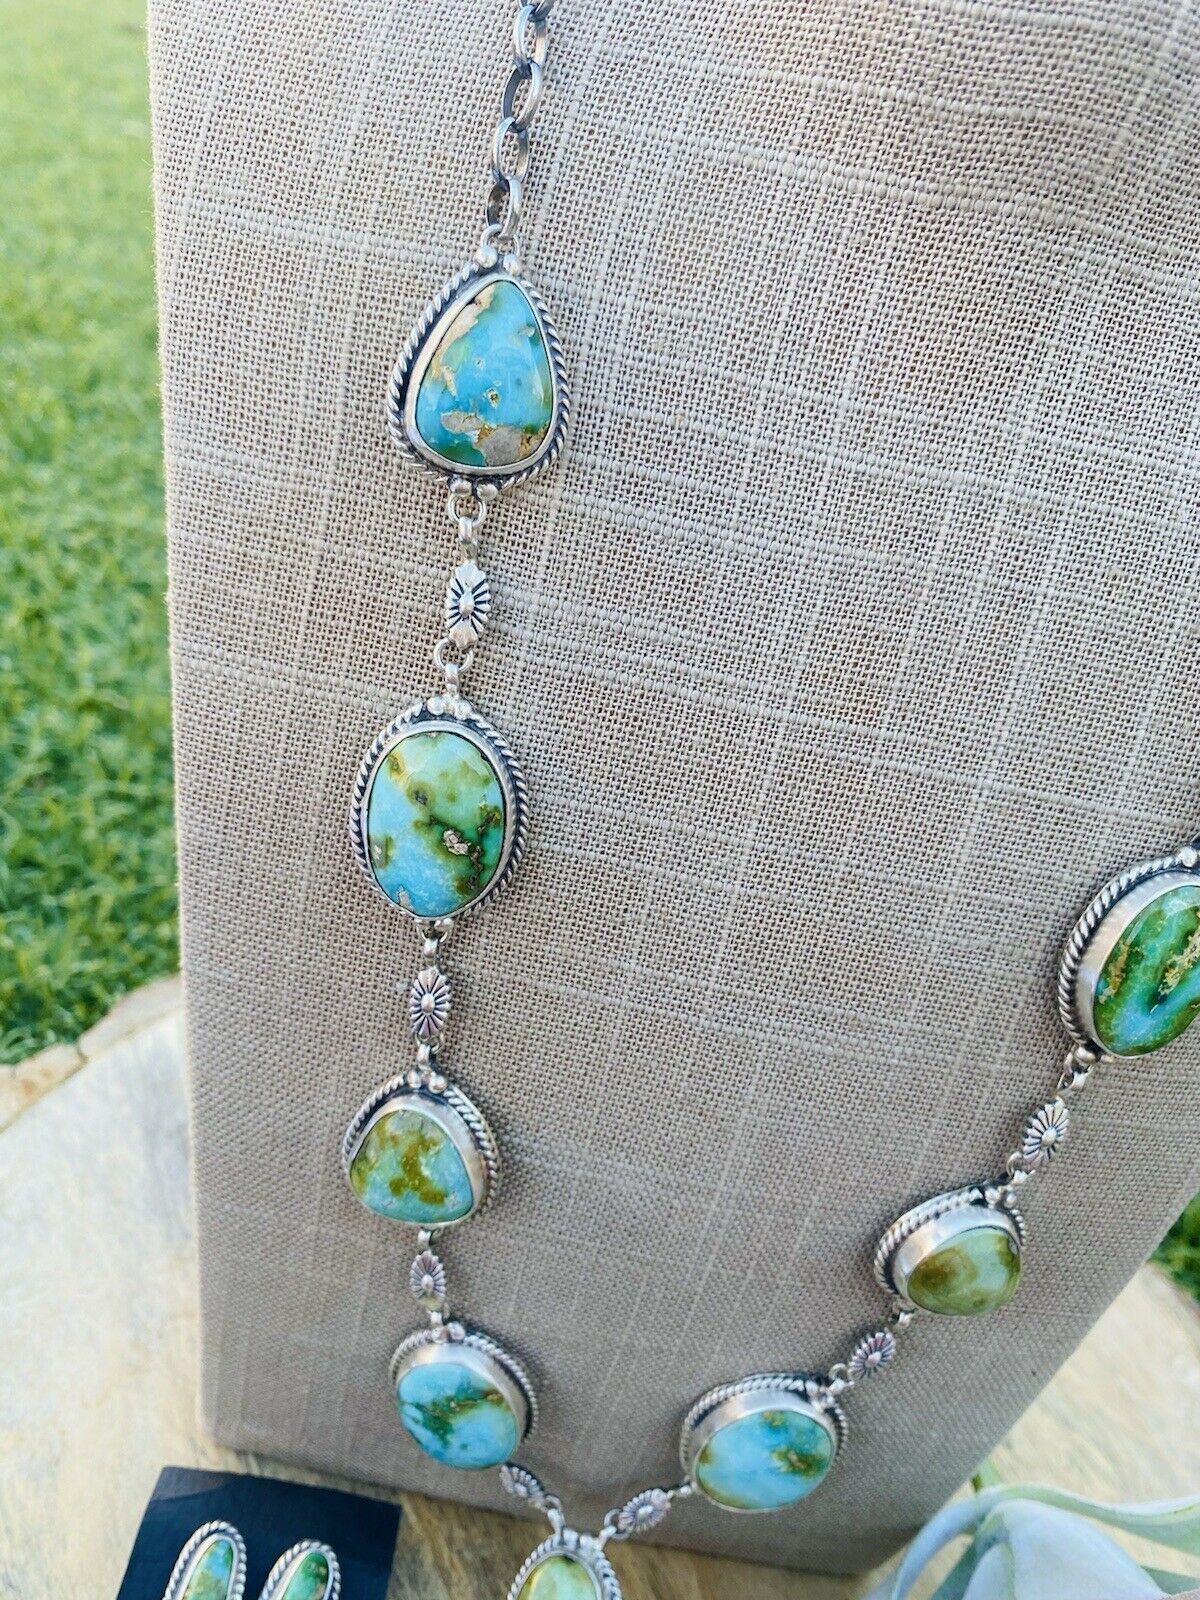 Stunning Navajo Sterling Silver & Sonoran Mountain Turquoise Necklace Set